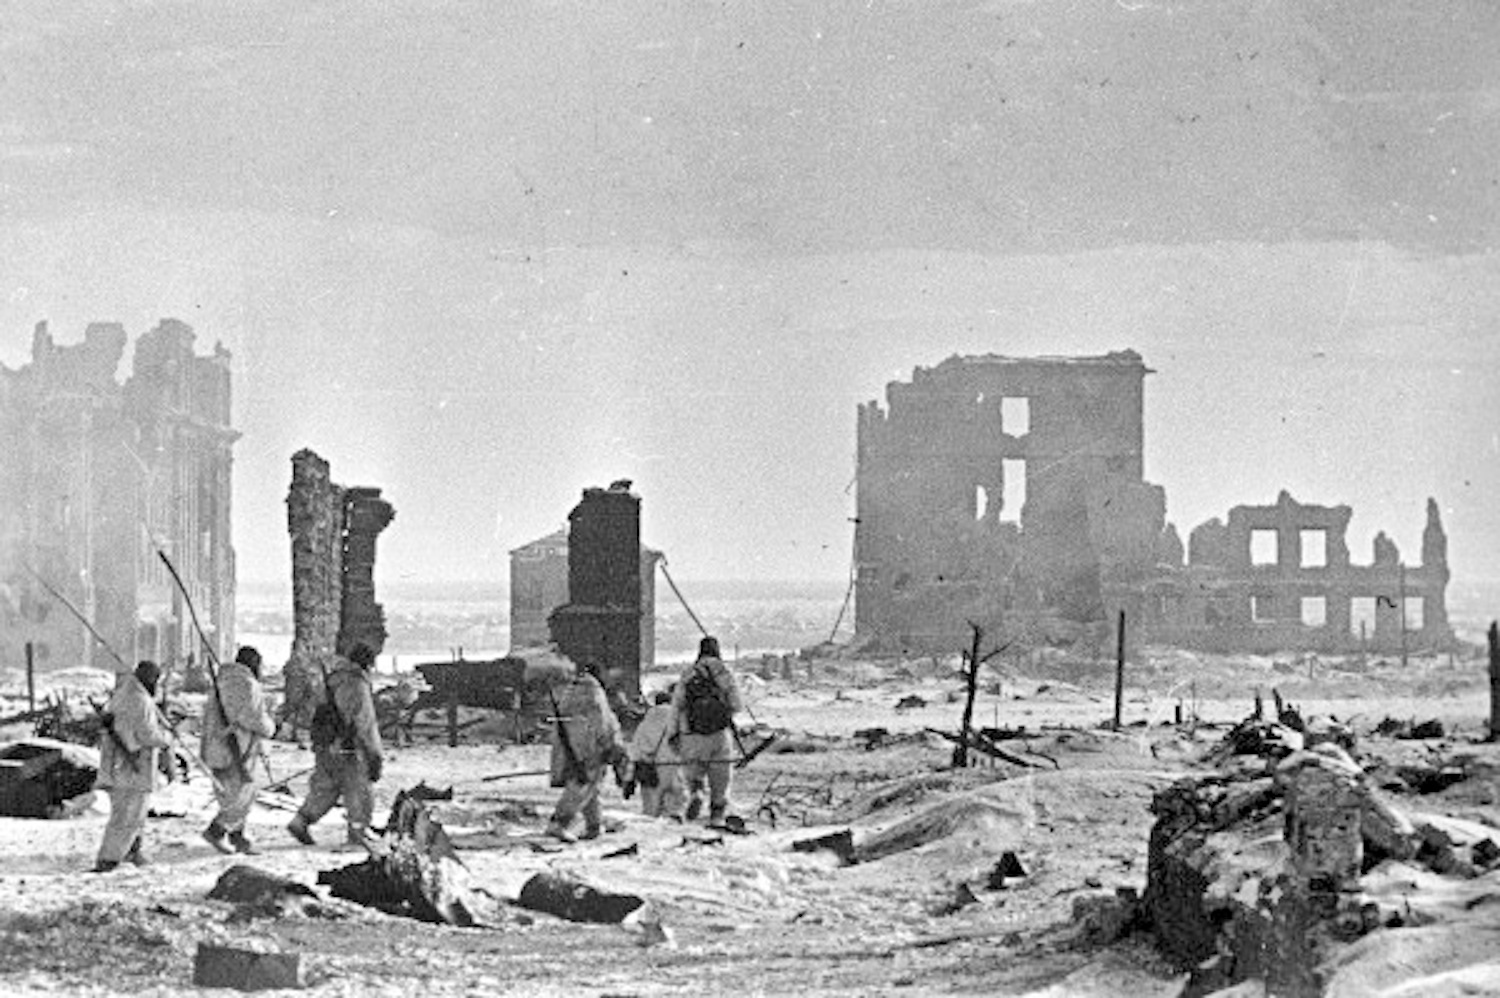 February 2, 1943: The Soviets Accept Germany’s Surrender in the Battle of Stalingrad